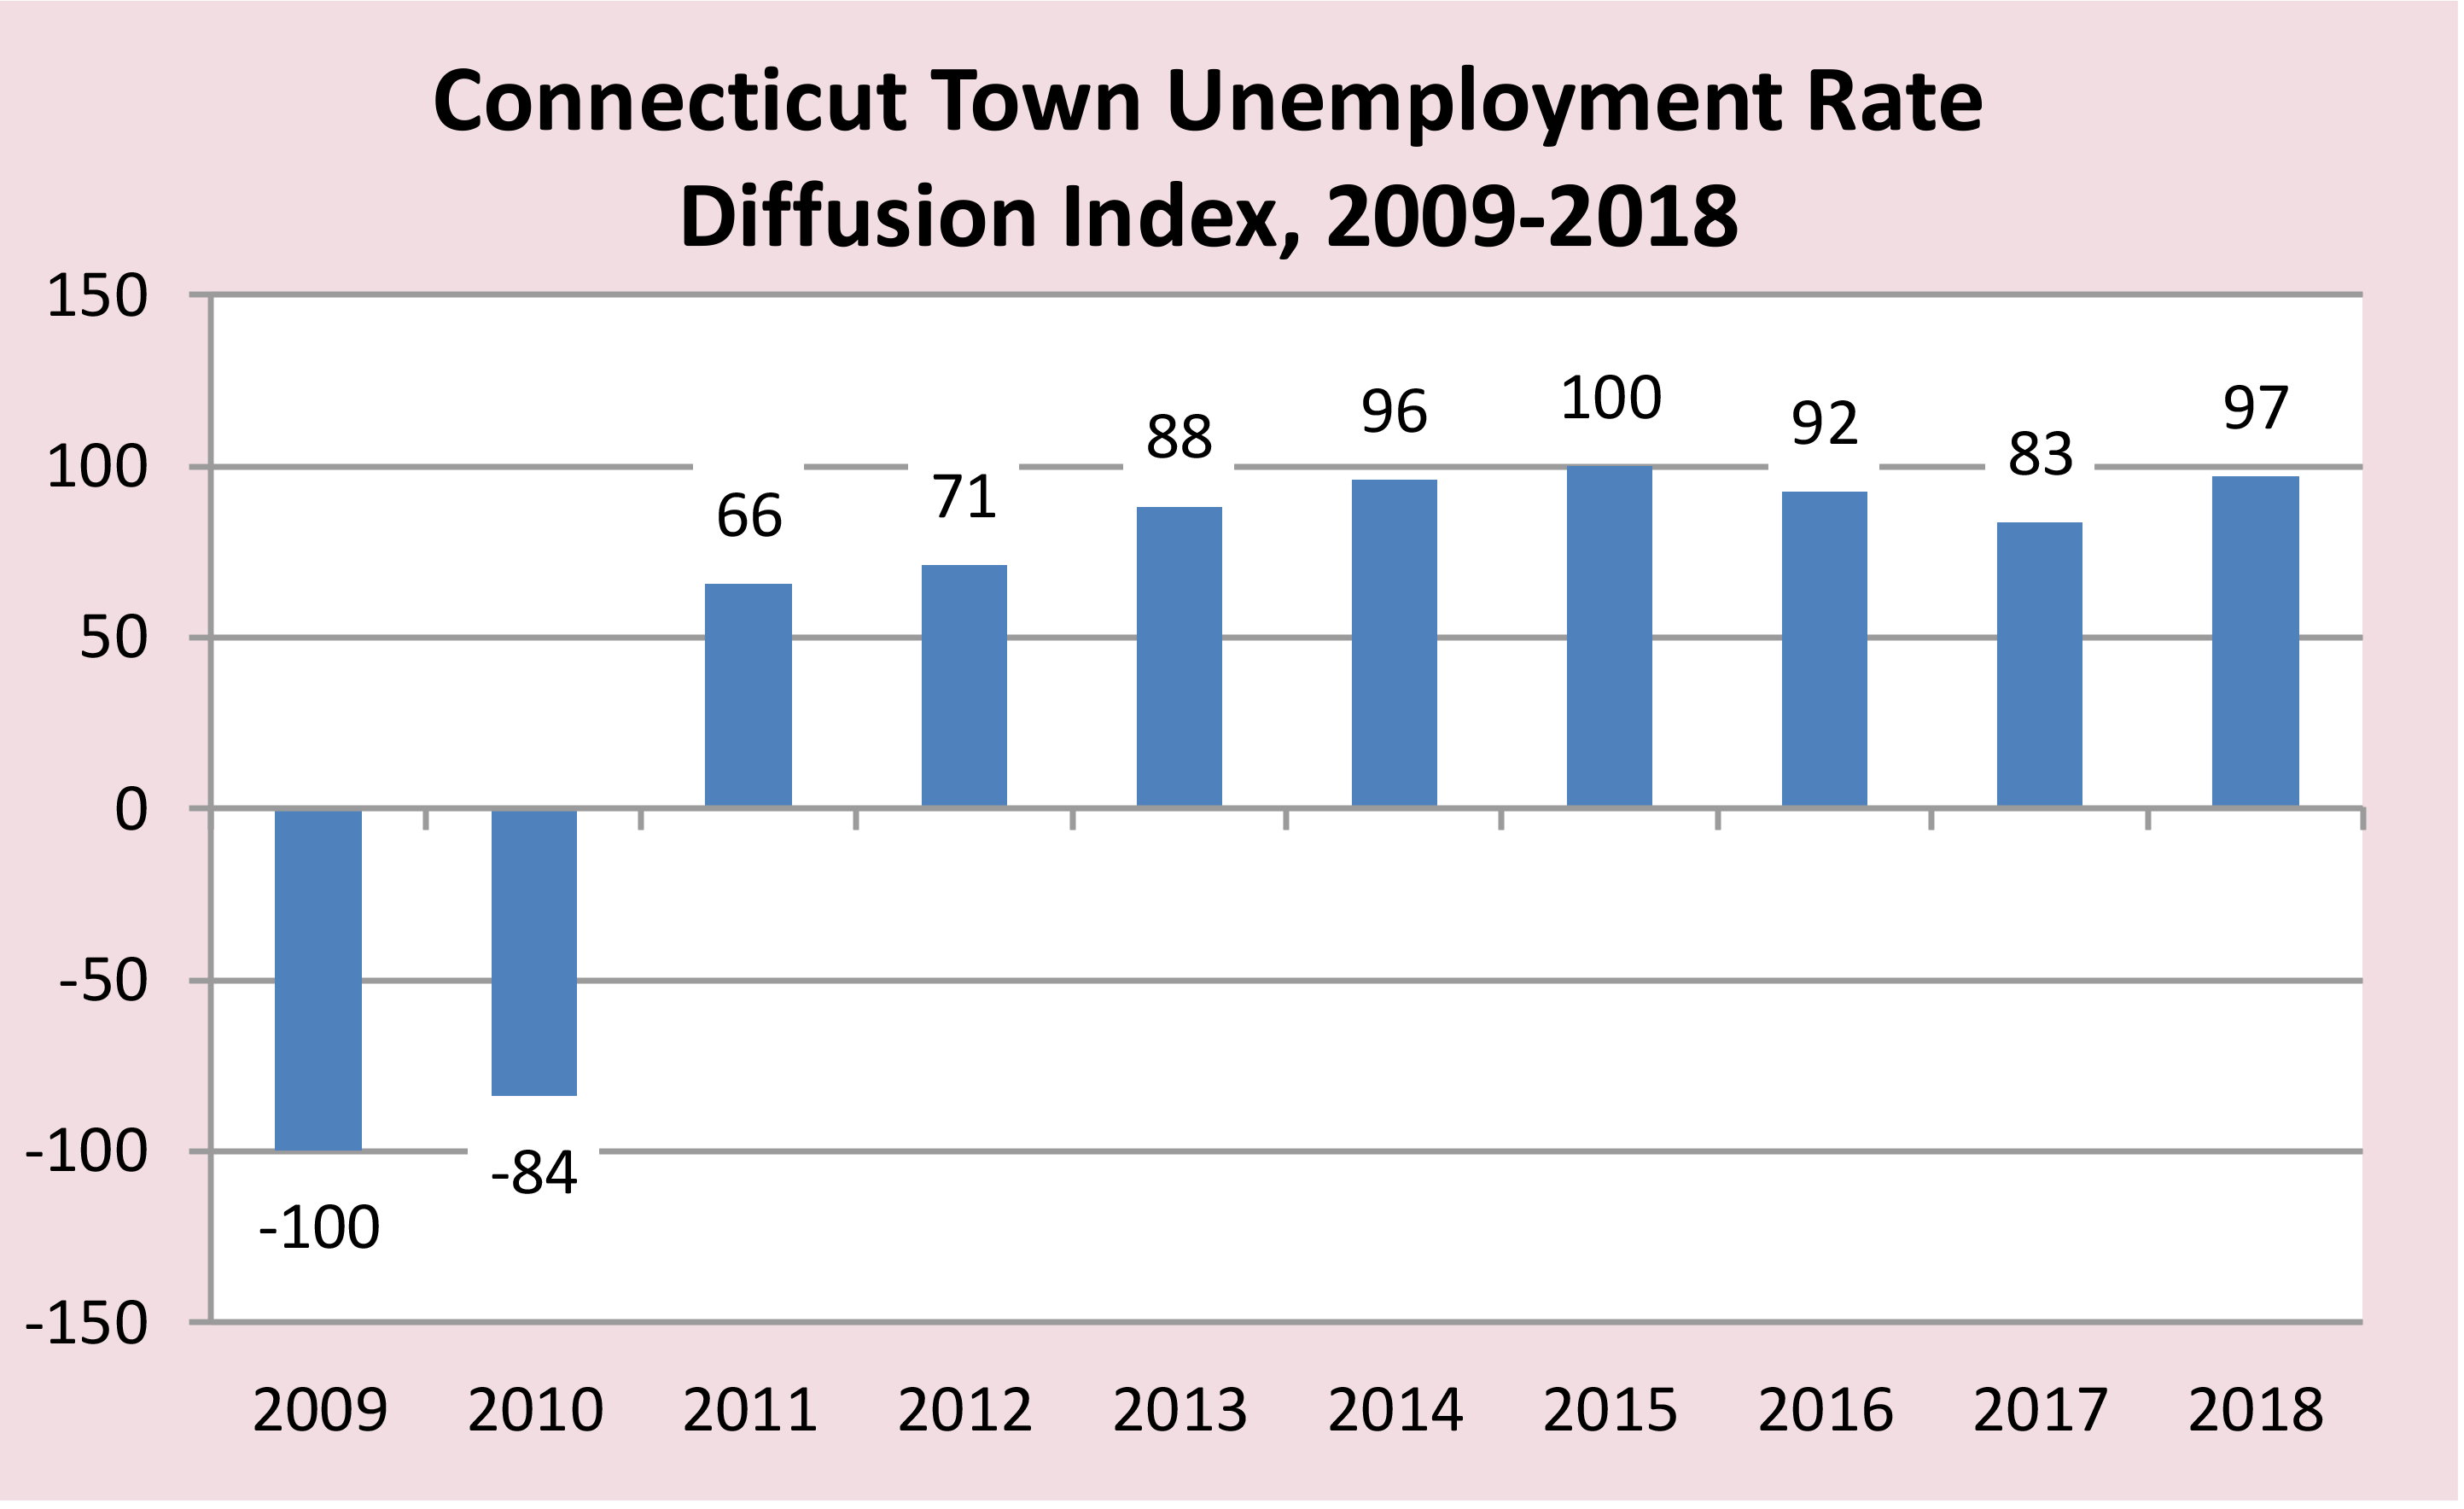 Chart: Connecticut Town Unemployment Rate Diffusion Index, 2009-2018